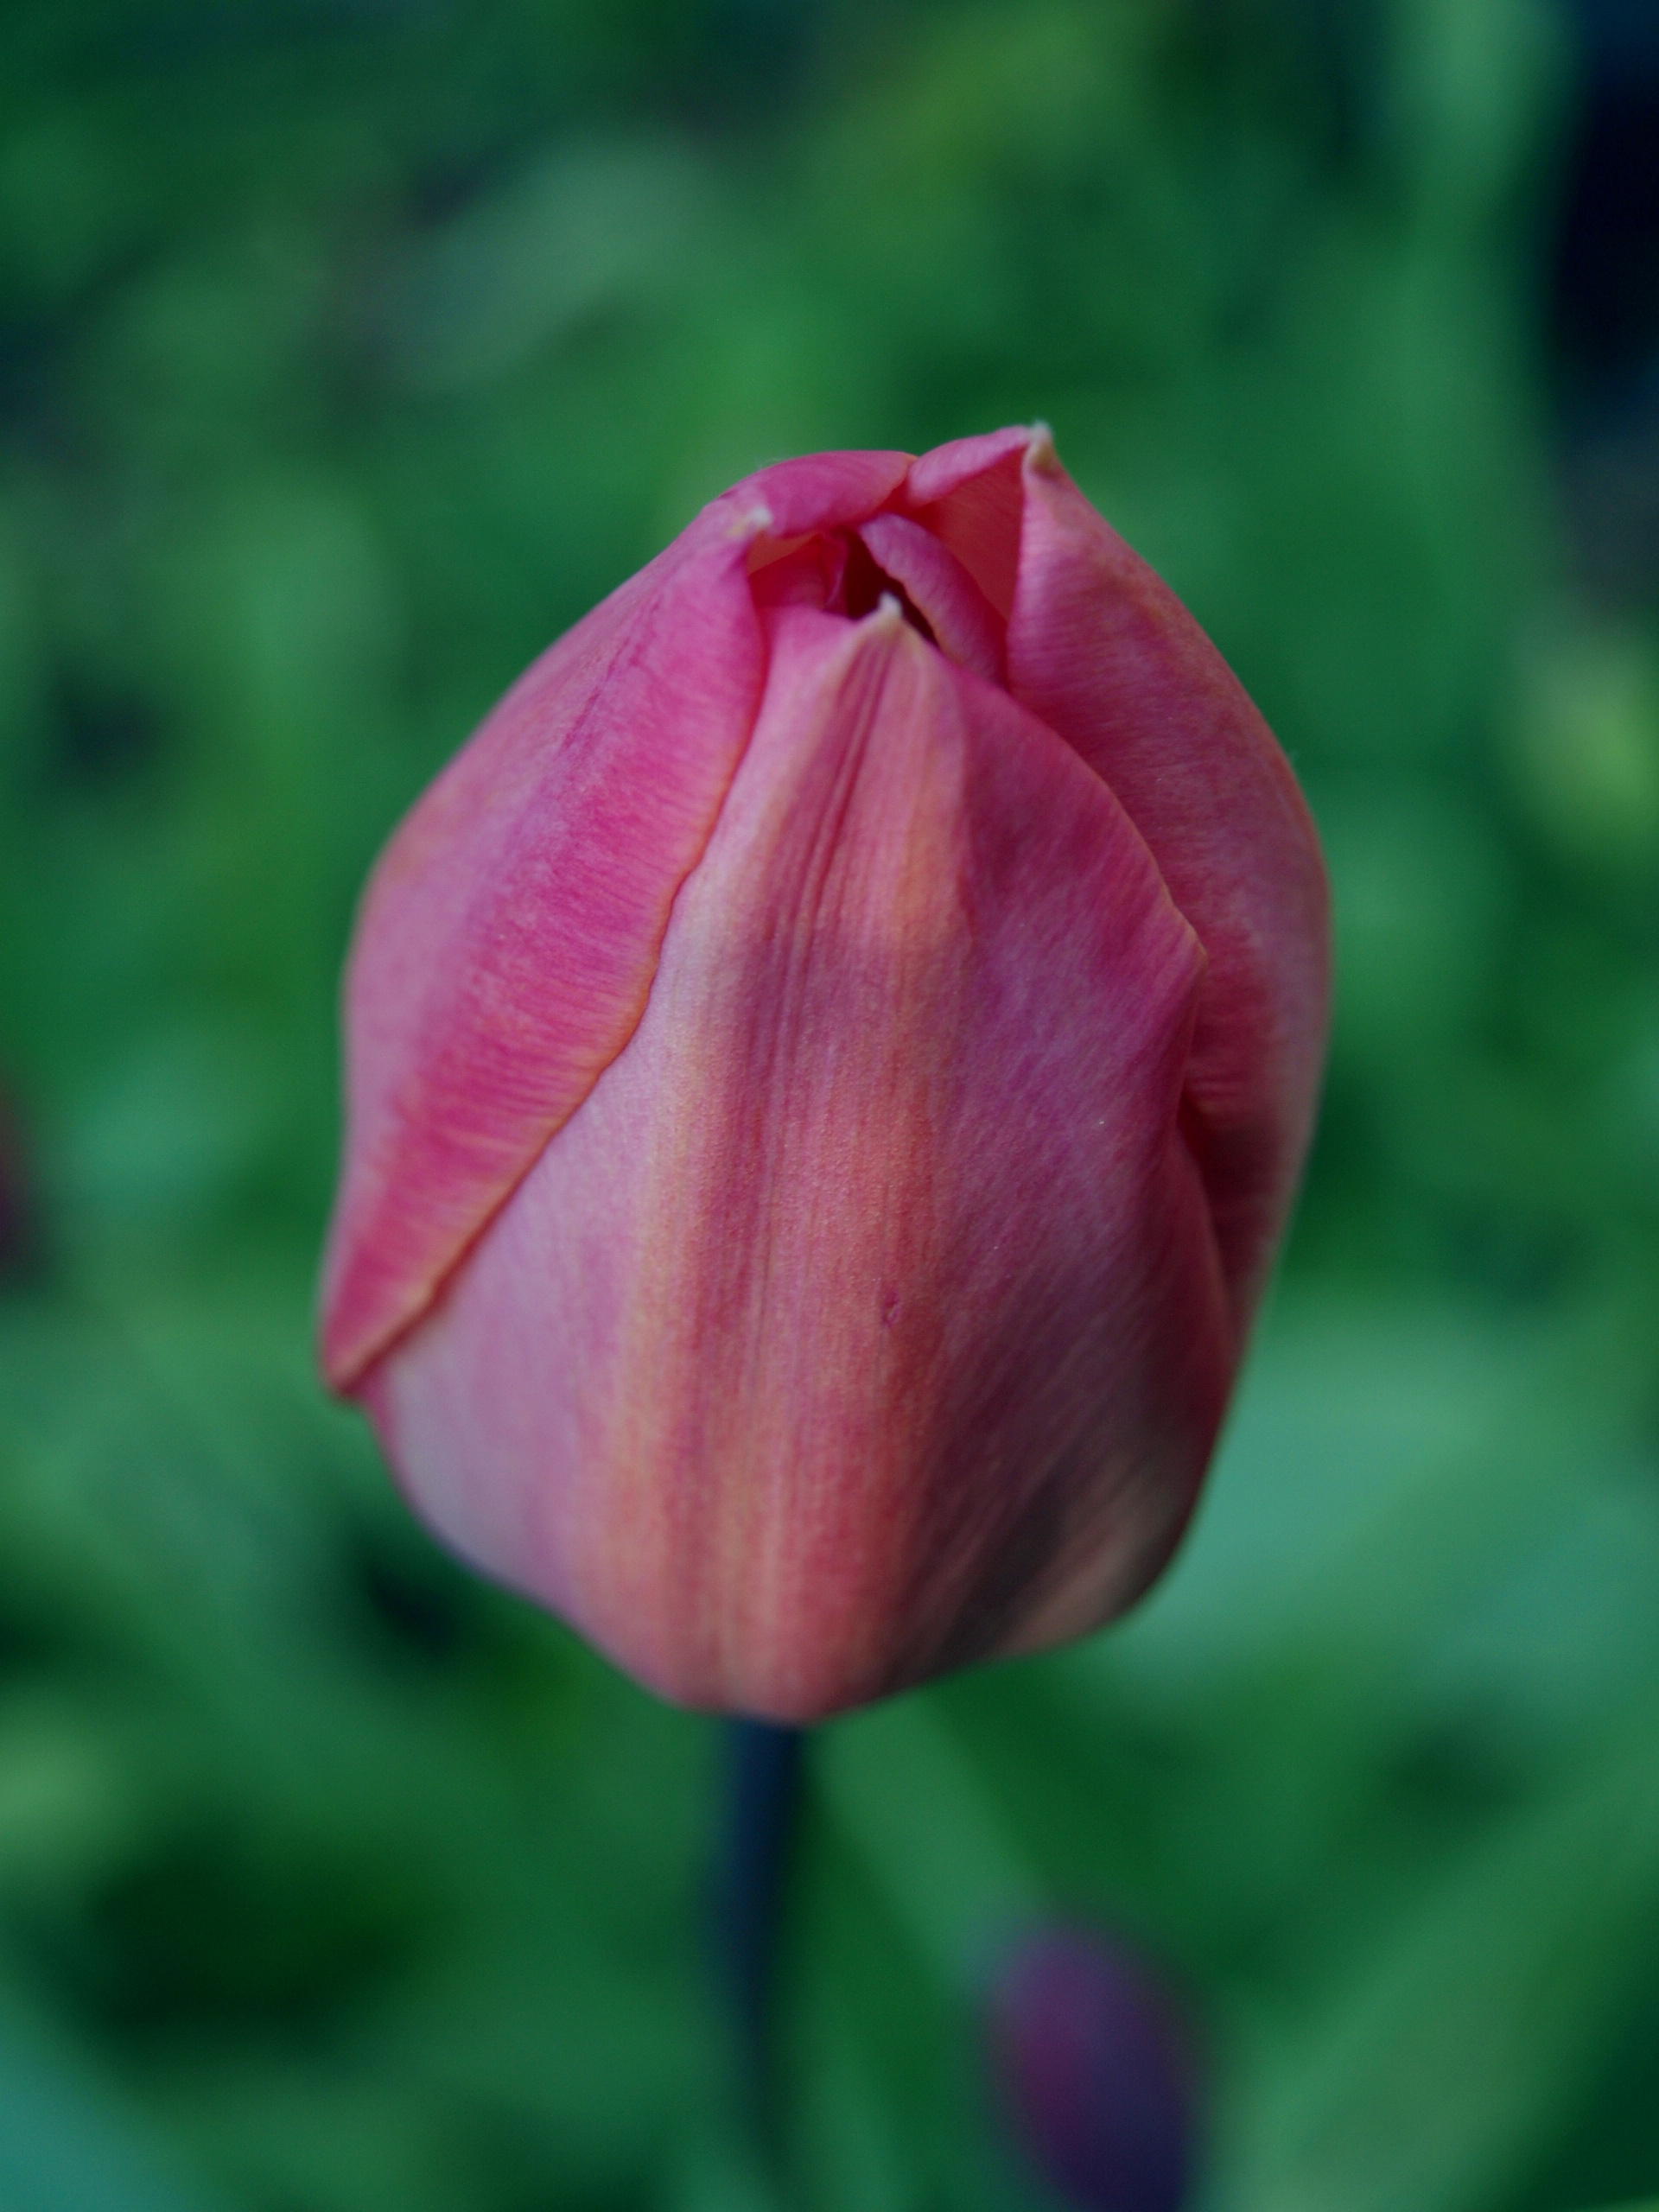 The pink tulip